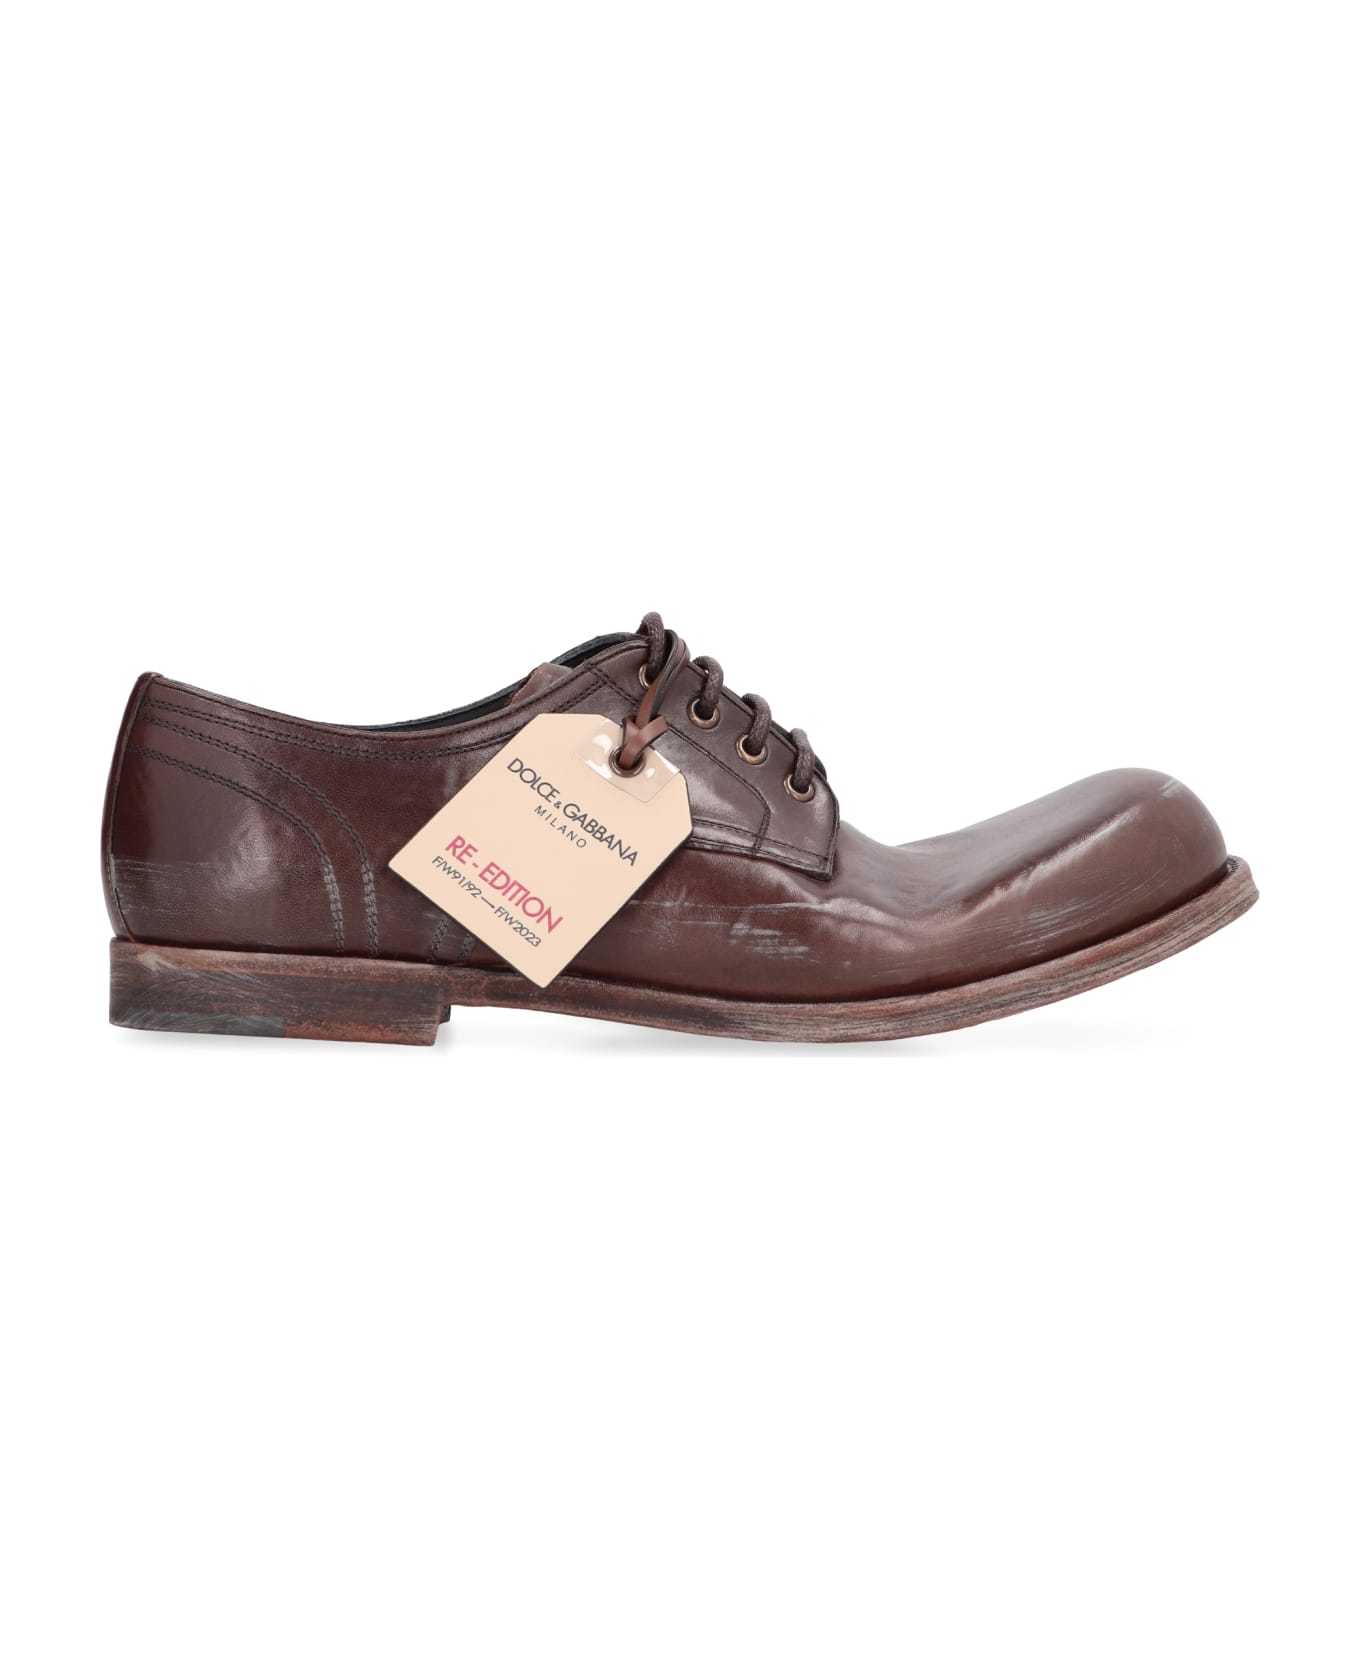 Dolce & Gabbana Leather Lace-up Derby Shoes - Saddle Brown